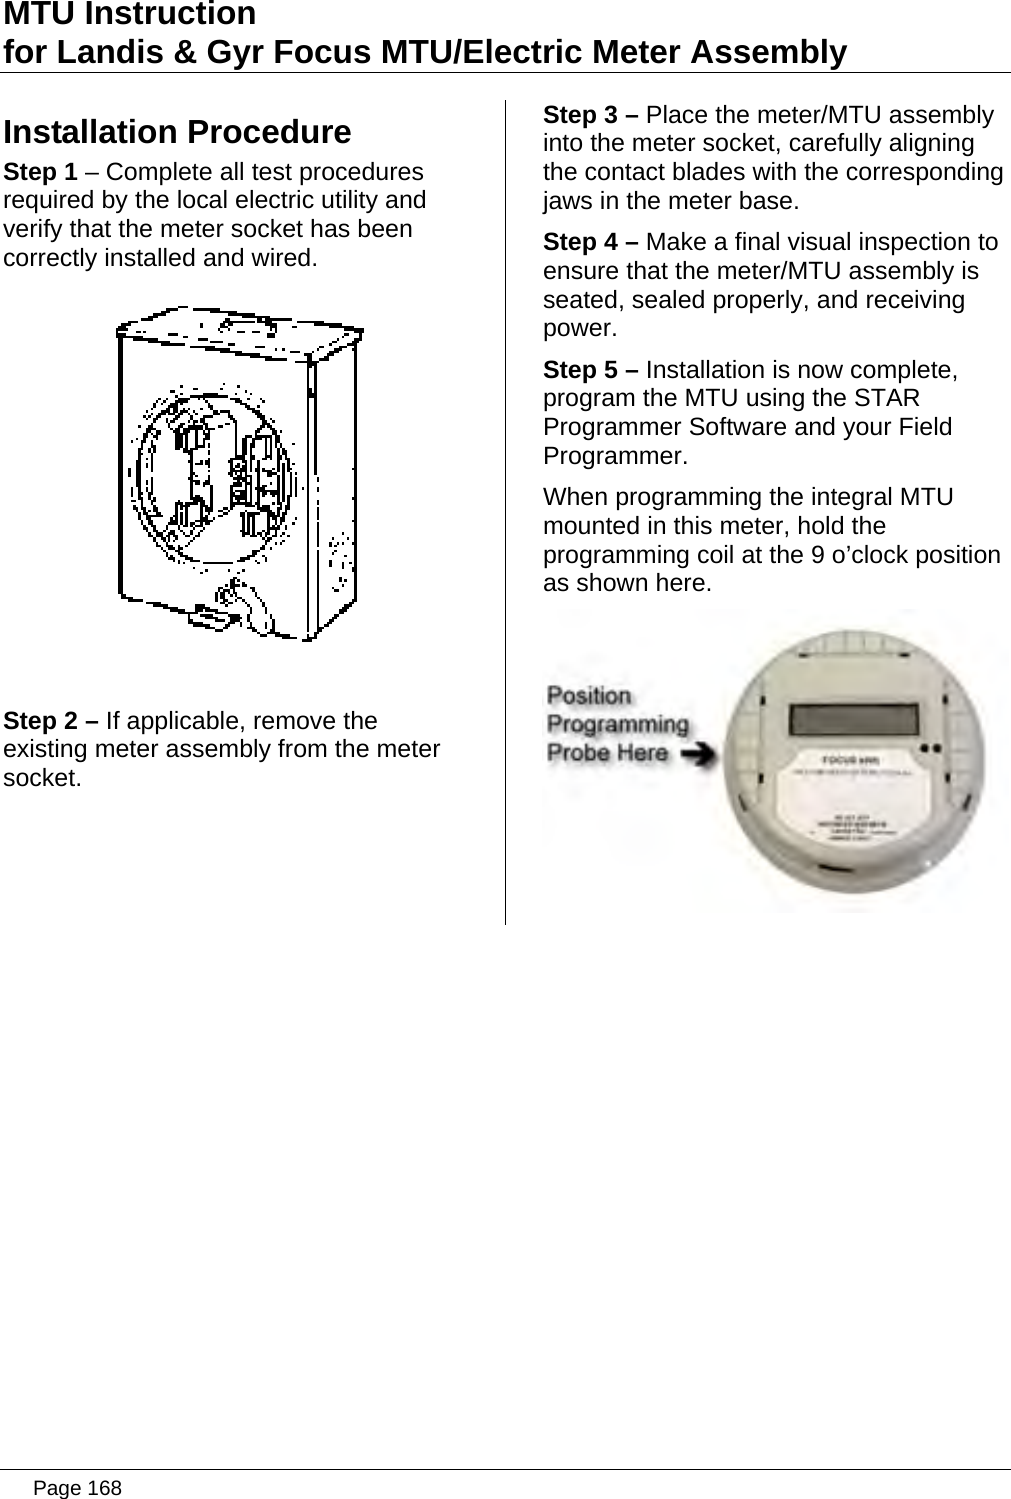 Page 168 of Aclara Technologies 09015 Transmitter for Meter Reading User Manual users manual